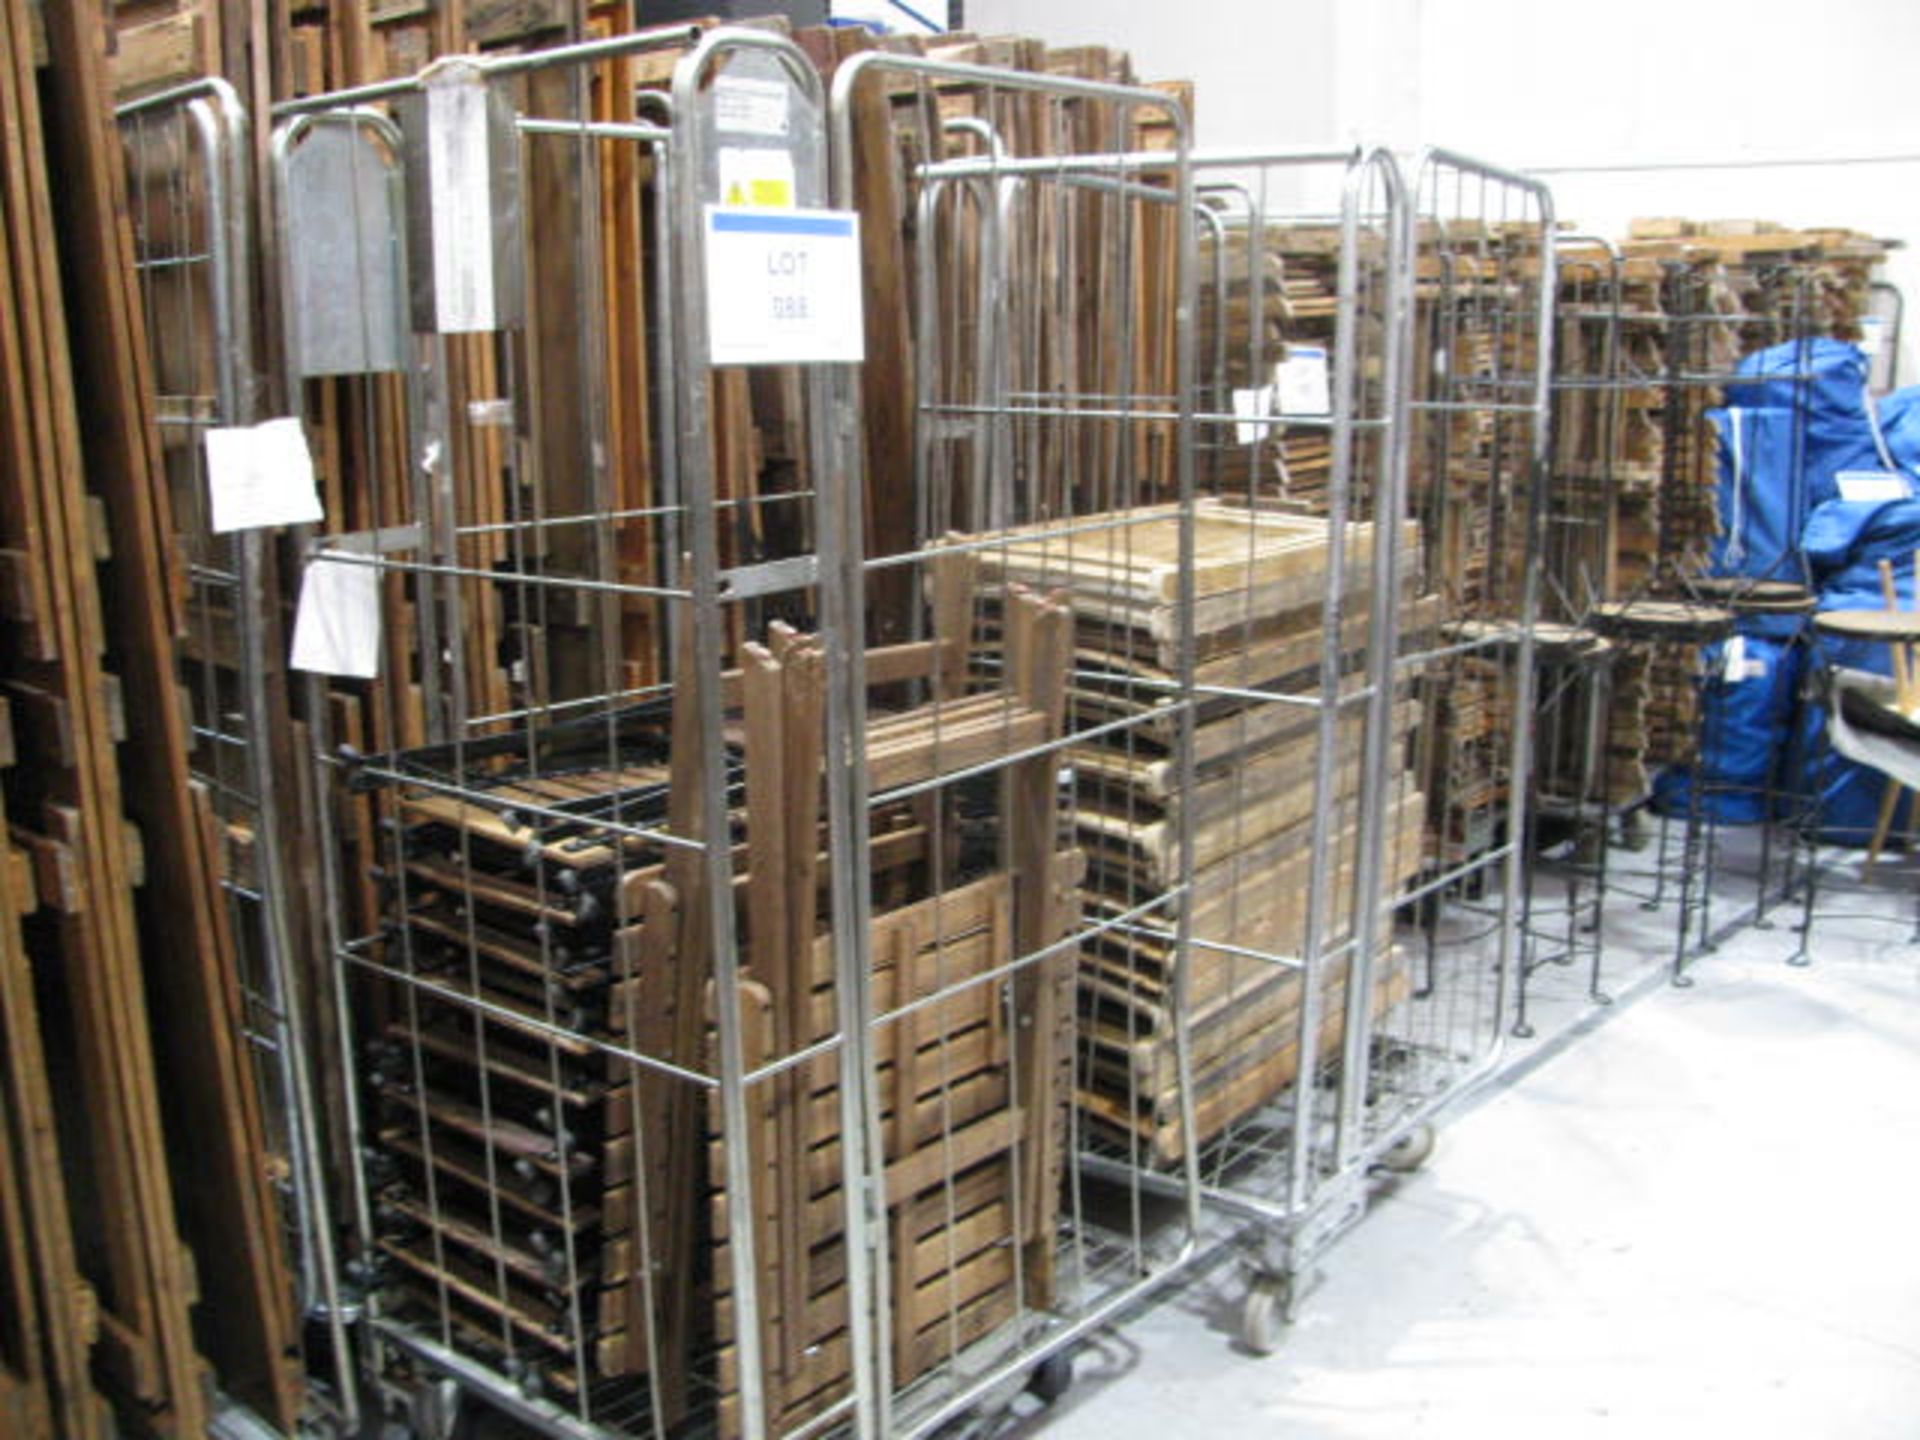 (2) Trolleys of folding chairs